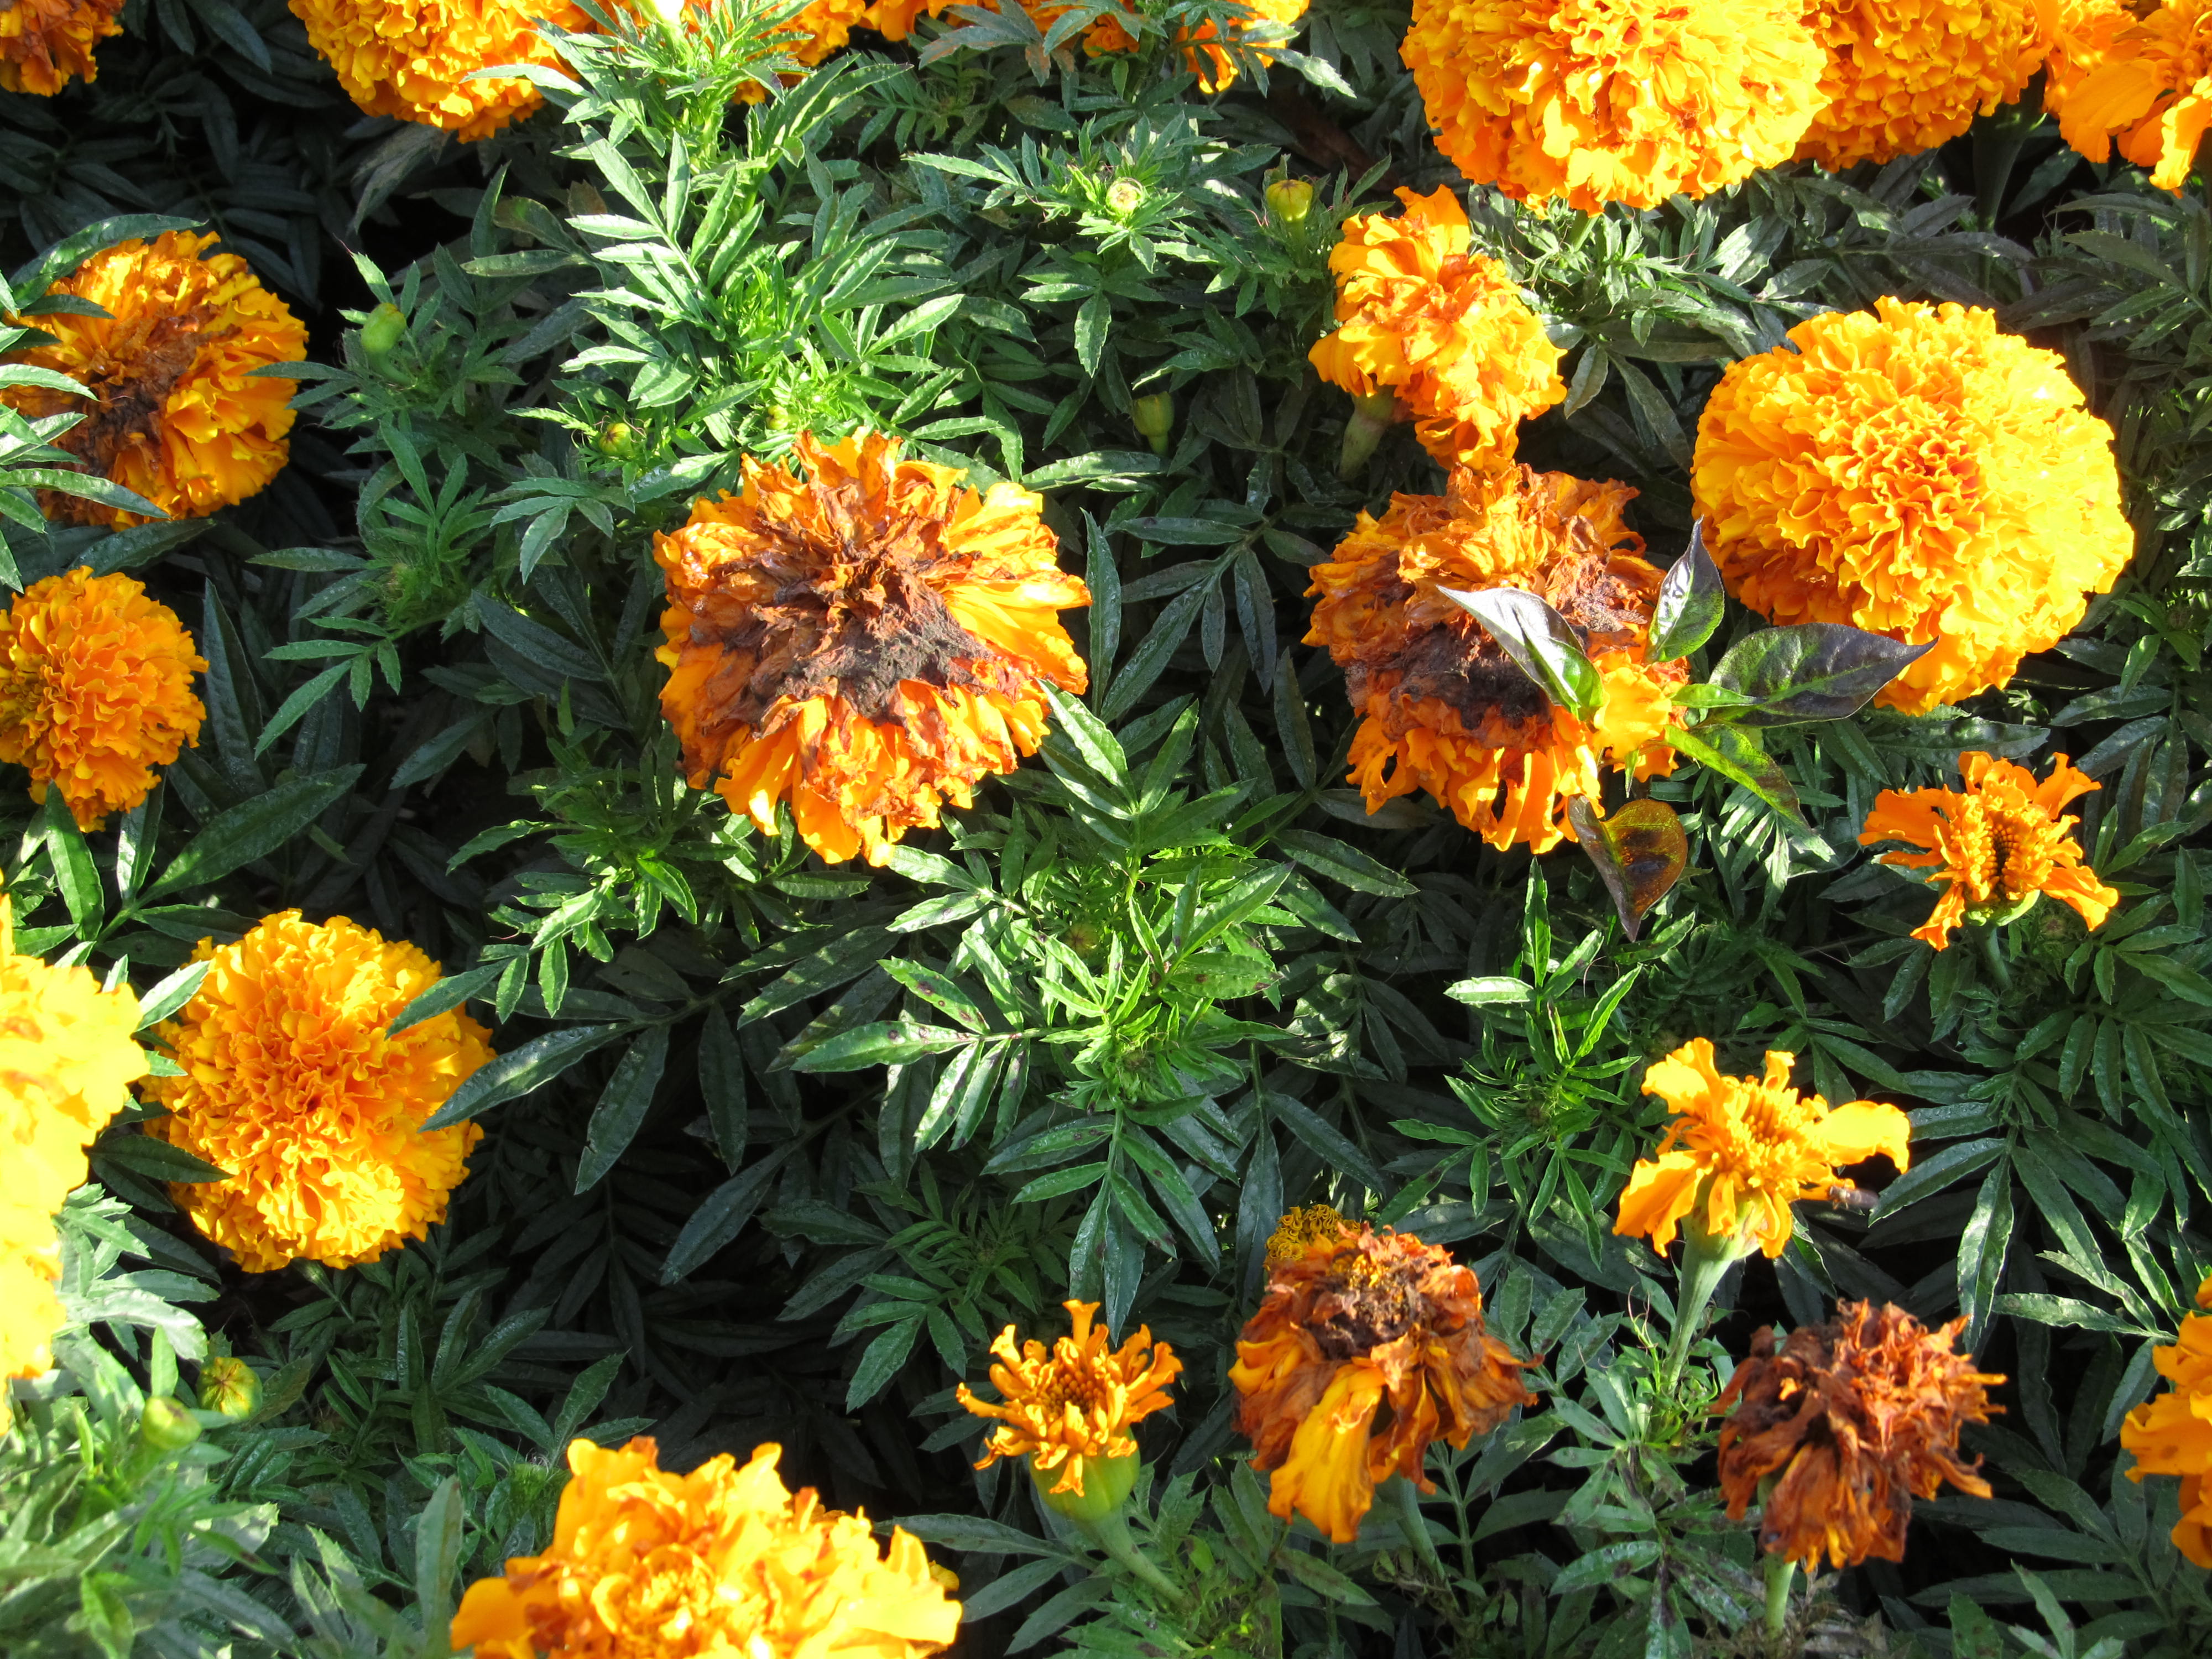 Botrytis Disease in Marigolds Can Be Avoided | What Grows There :: Hugh Conlon, Horticulturalist, Professor, Lecturer, and Gardener